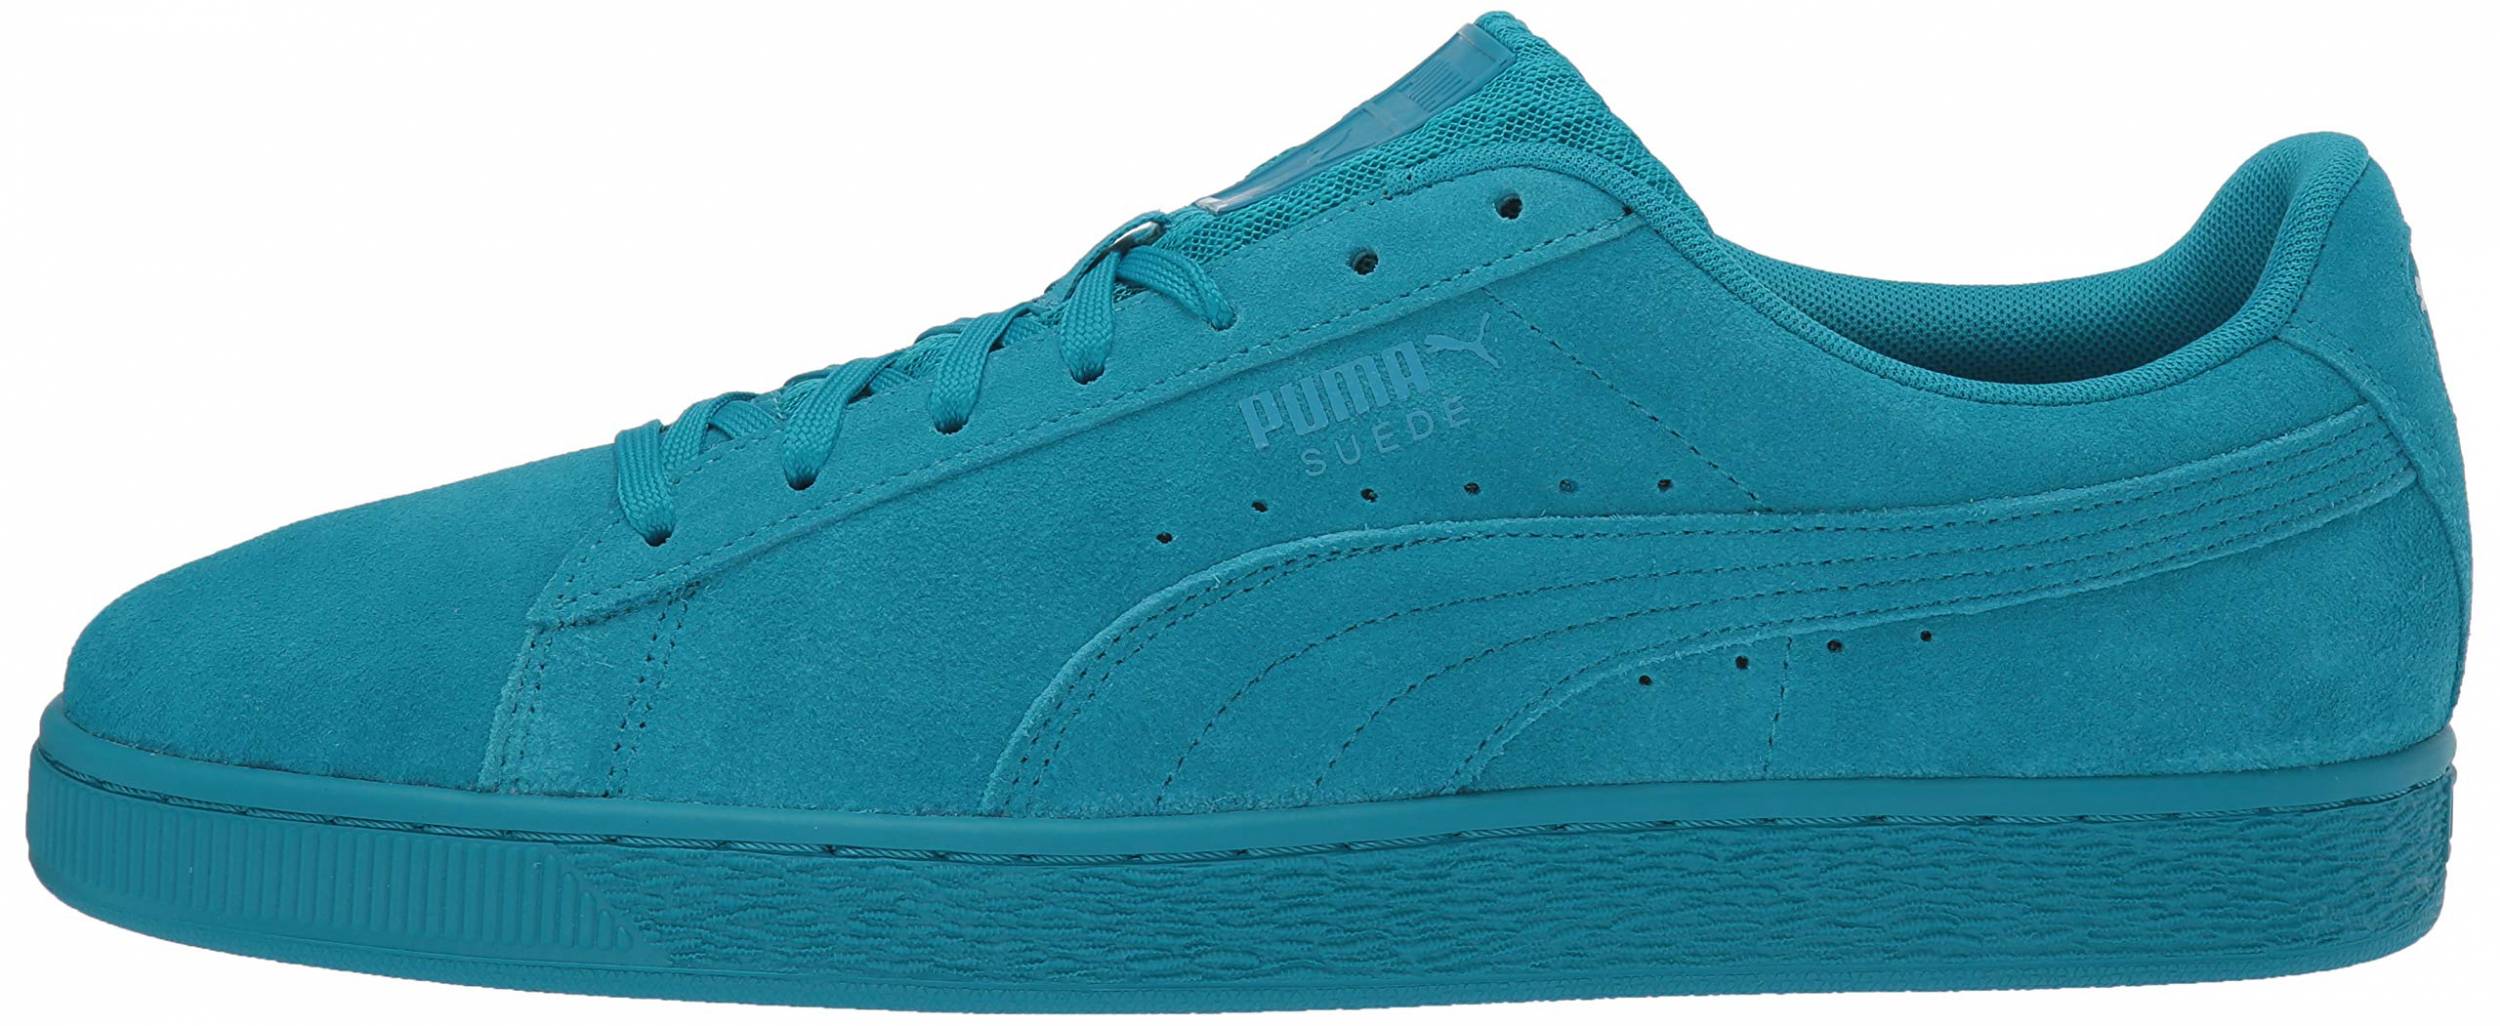 turquoise and white pumas